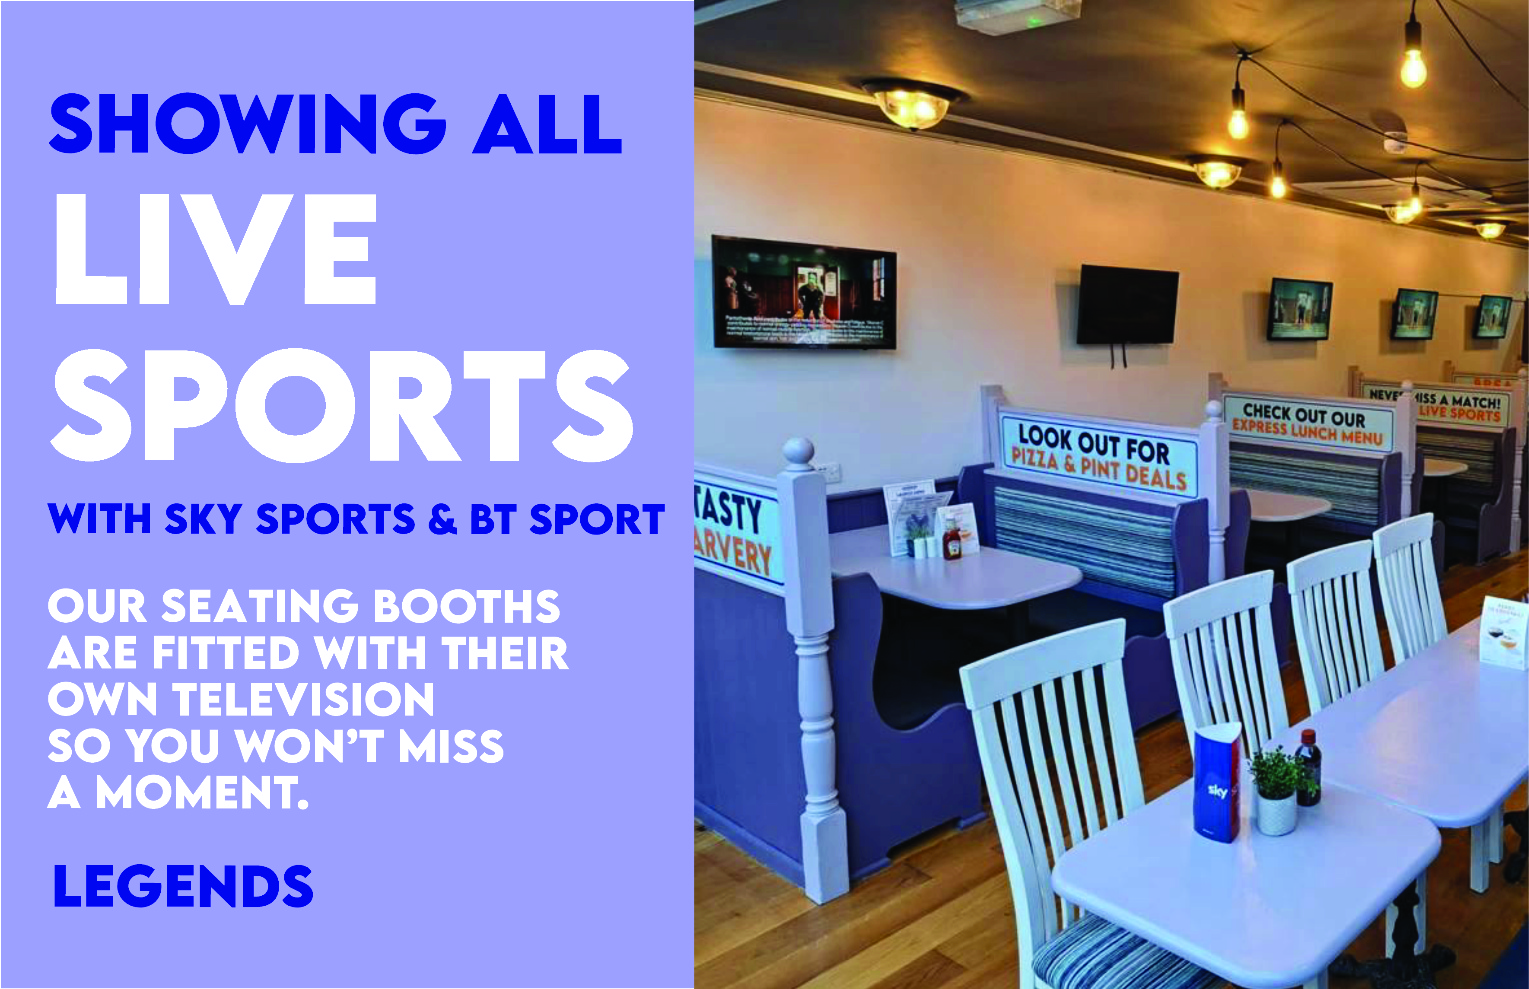 SKY SPORTS & BT SPORTS SHOWING ALL LIVE FOOTBALL AND LIVE SPORTS AT LEGENDS BELFAST